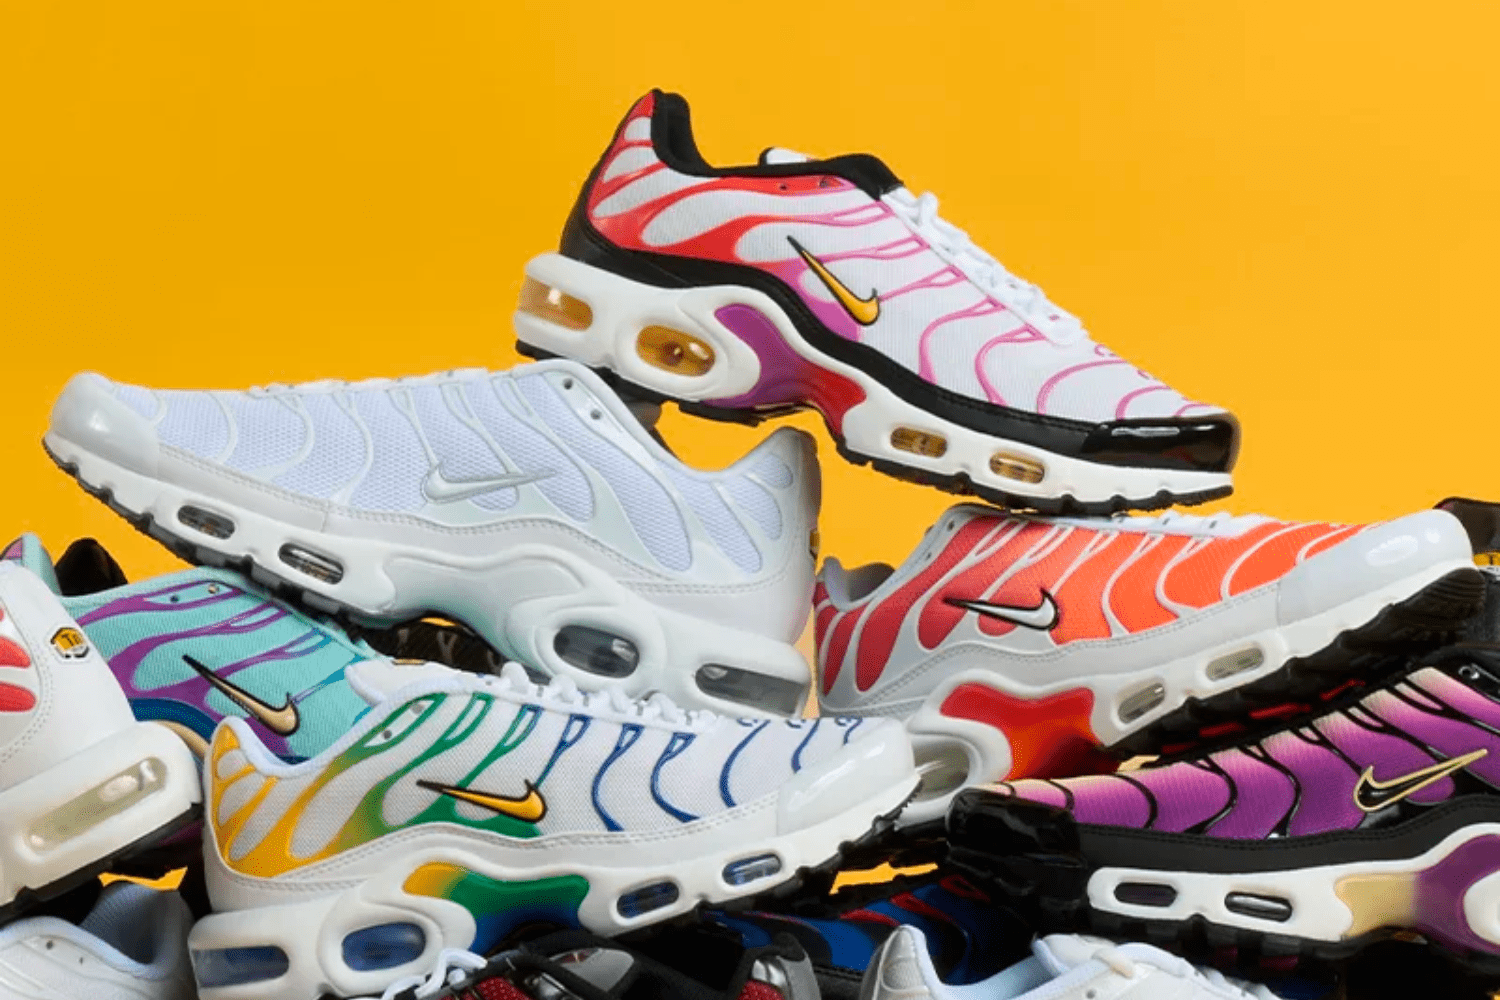 Celebrate the Nike Air Max line with Foot Locker